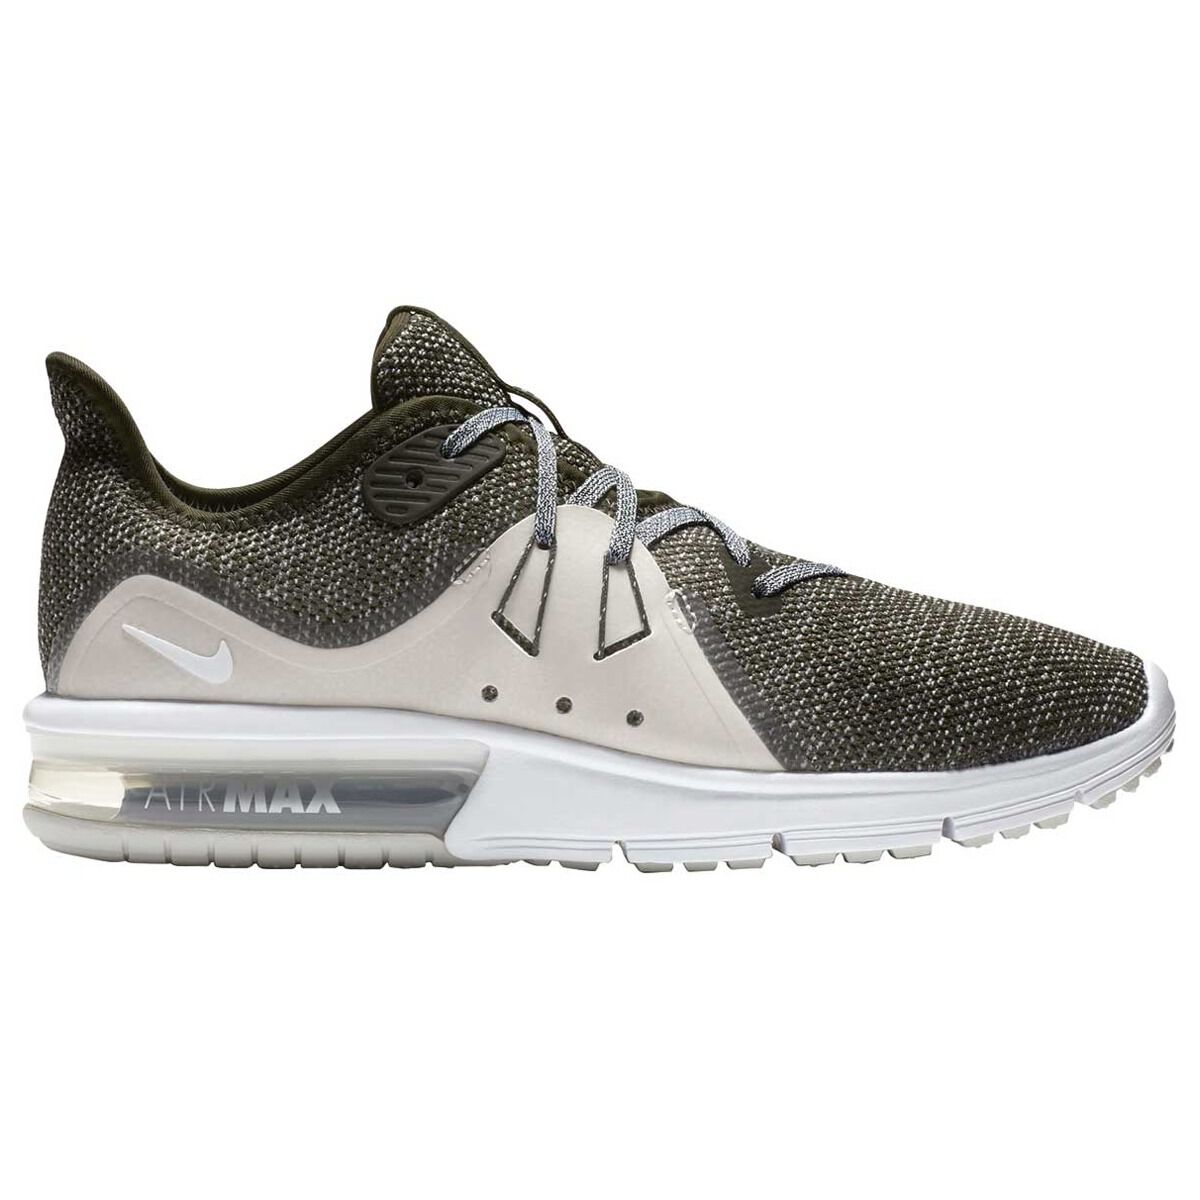 nike air max sequent 3 women's shoe